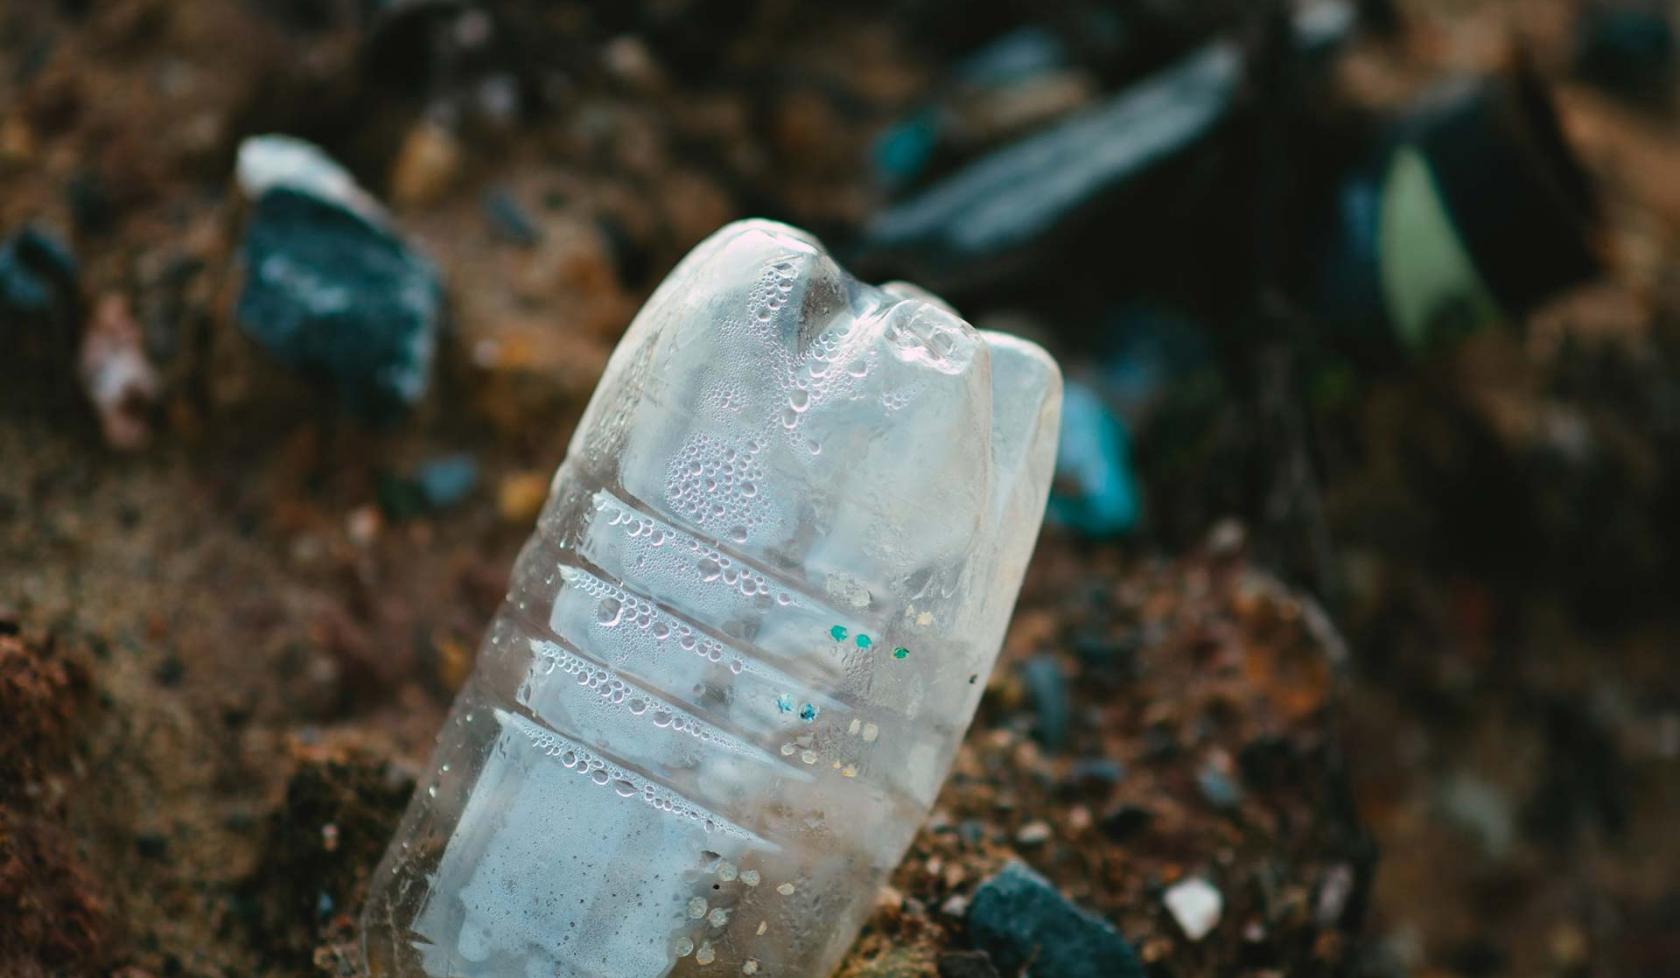 A trashed water bottle littering the land